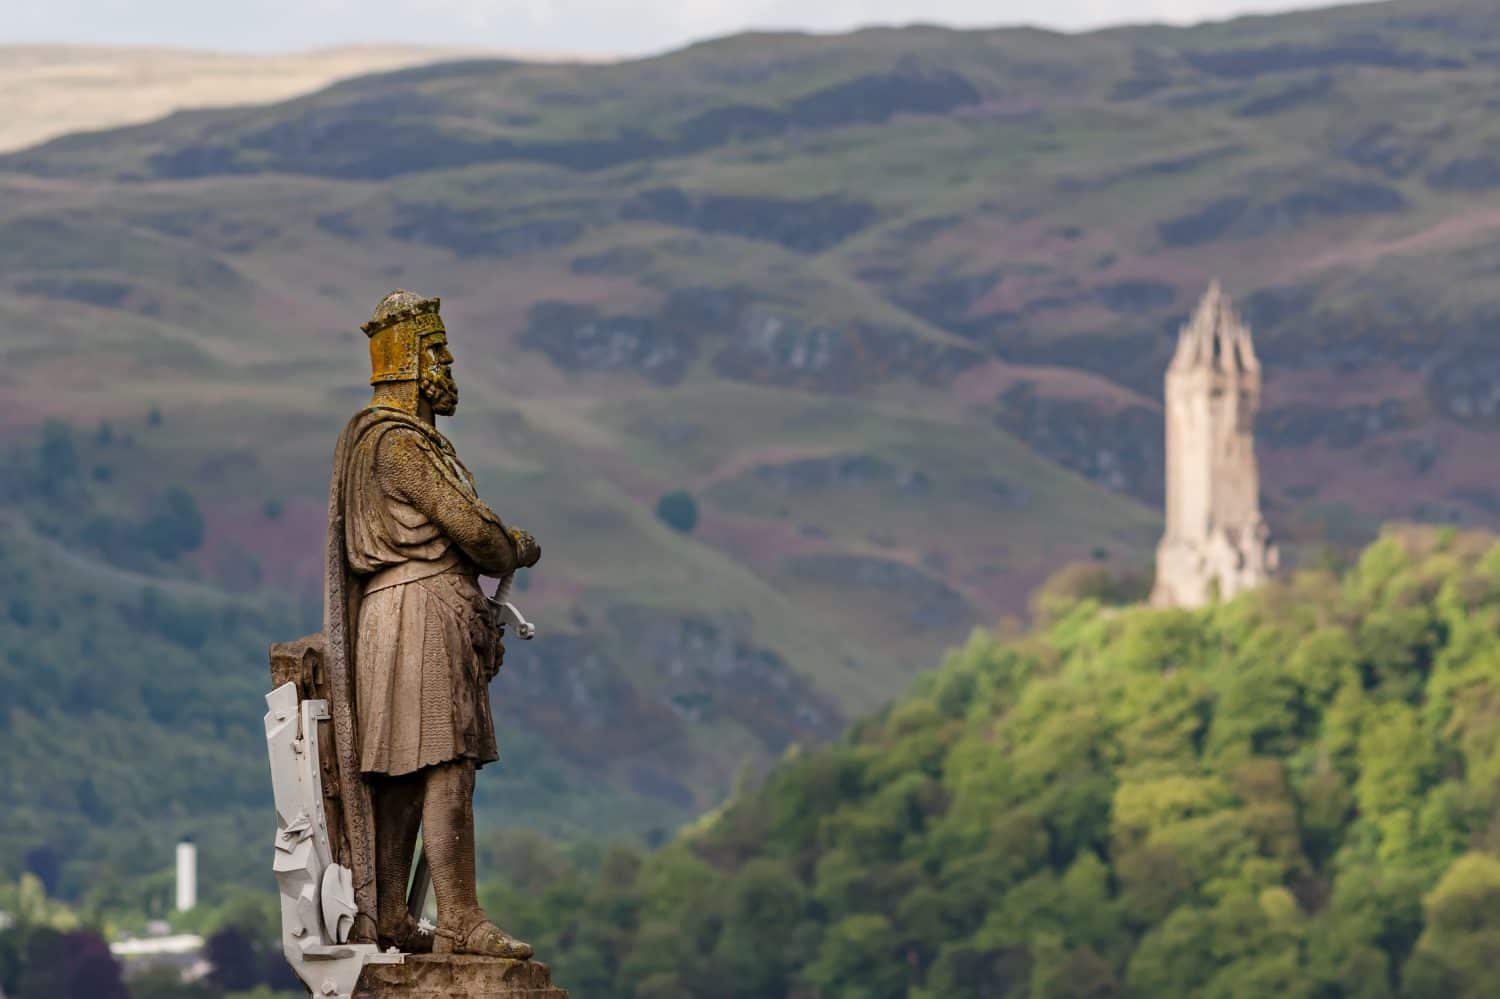 The statue of King Robert I (also known as Robert The Bruce), who secured Scotland's independence from England. In the background National Wallace Monument commemorates Sir William Wallace.